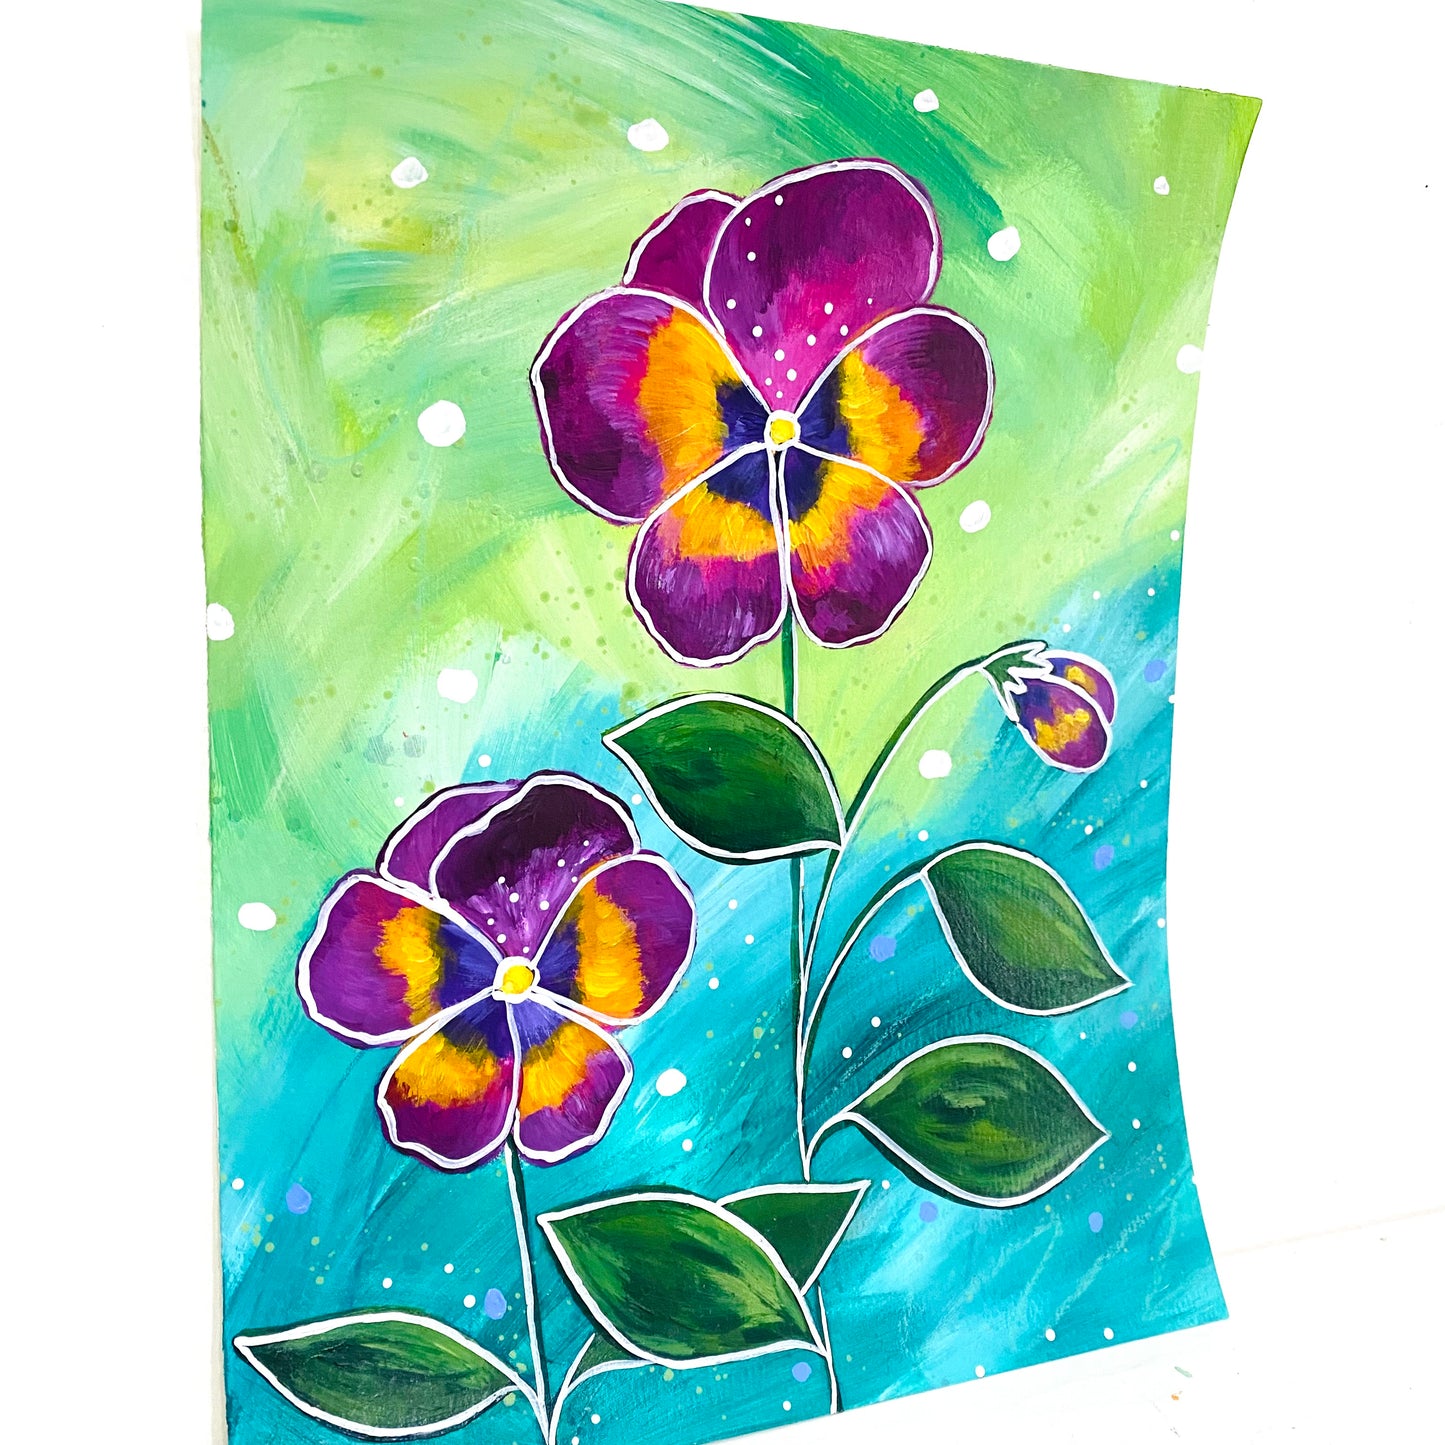 February Flowers Day 15 Pansy 8.5x11 inch original painting